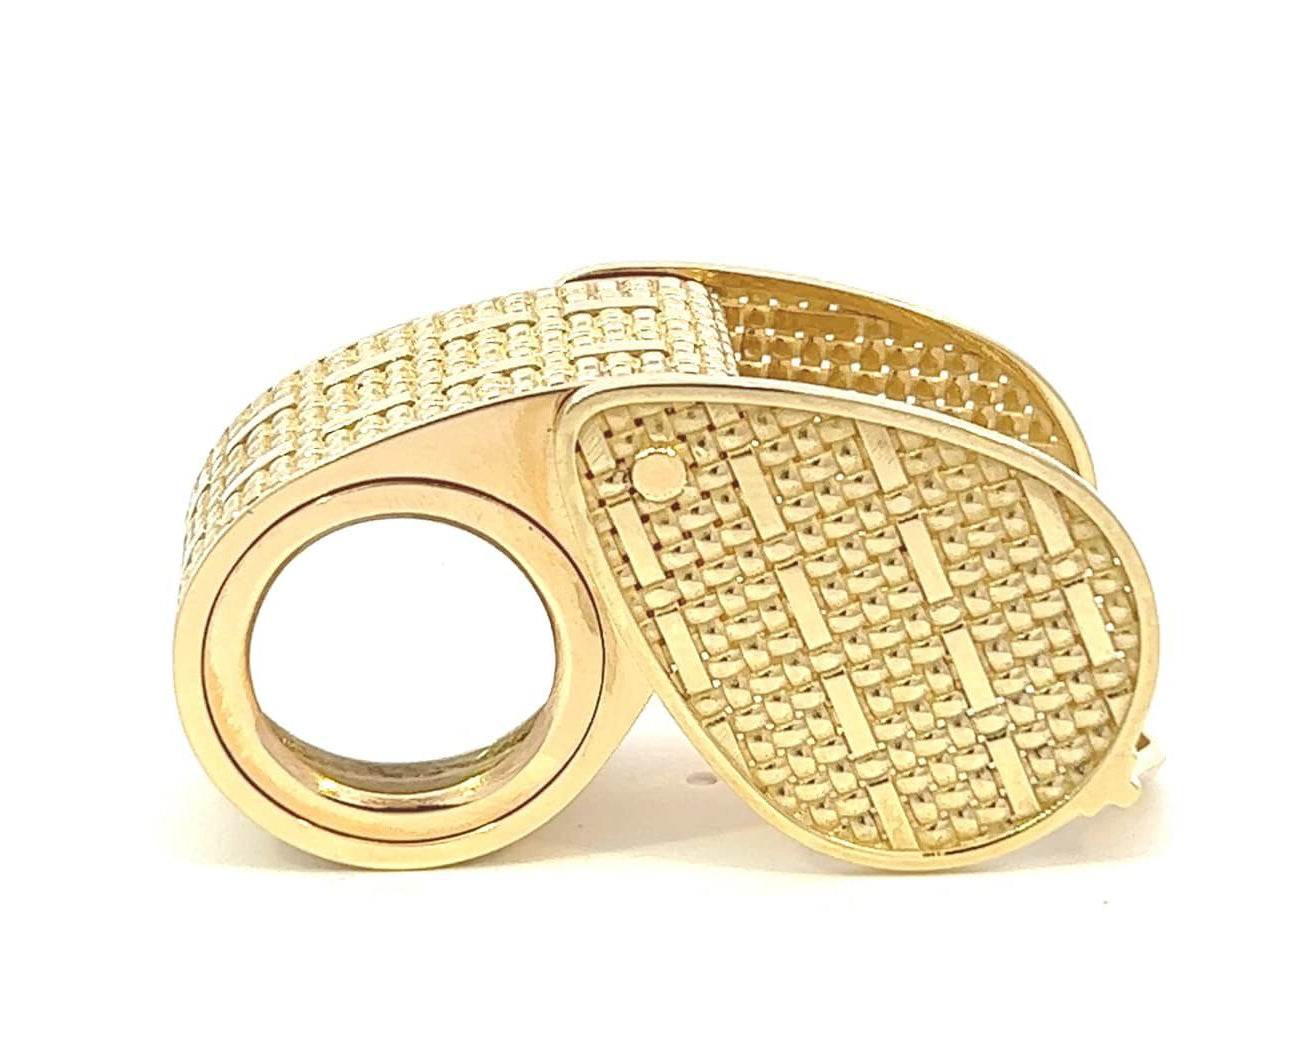 14K Yellow Gold 10X Jewelers Loupe, 18mm Lens